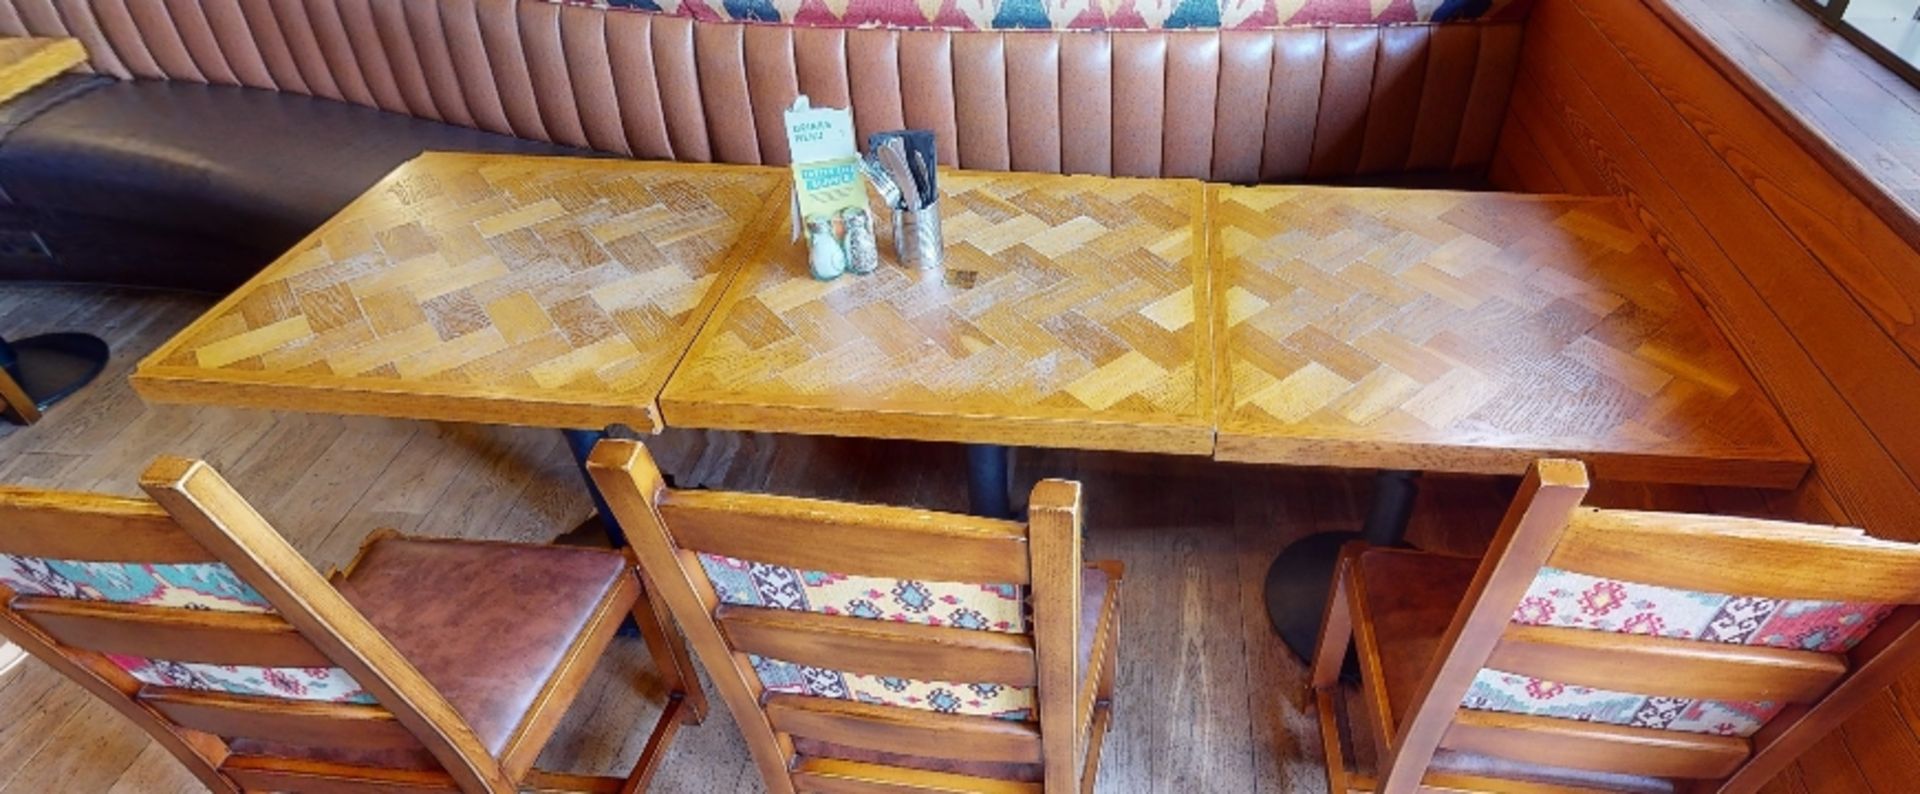 2 x Two Seater Restaurant Dining Tables With Parquet Style Tops and Cast Iron Bases - Image 4 of 9